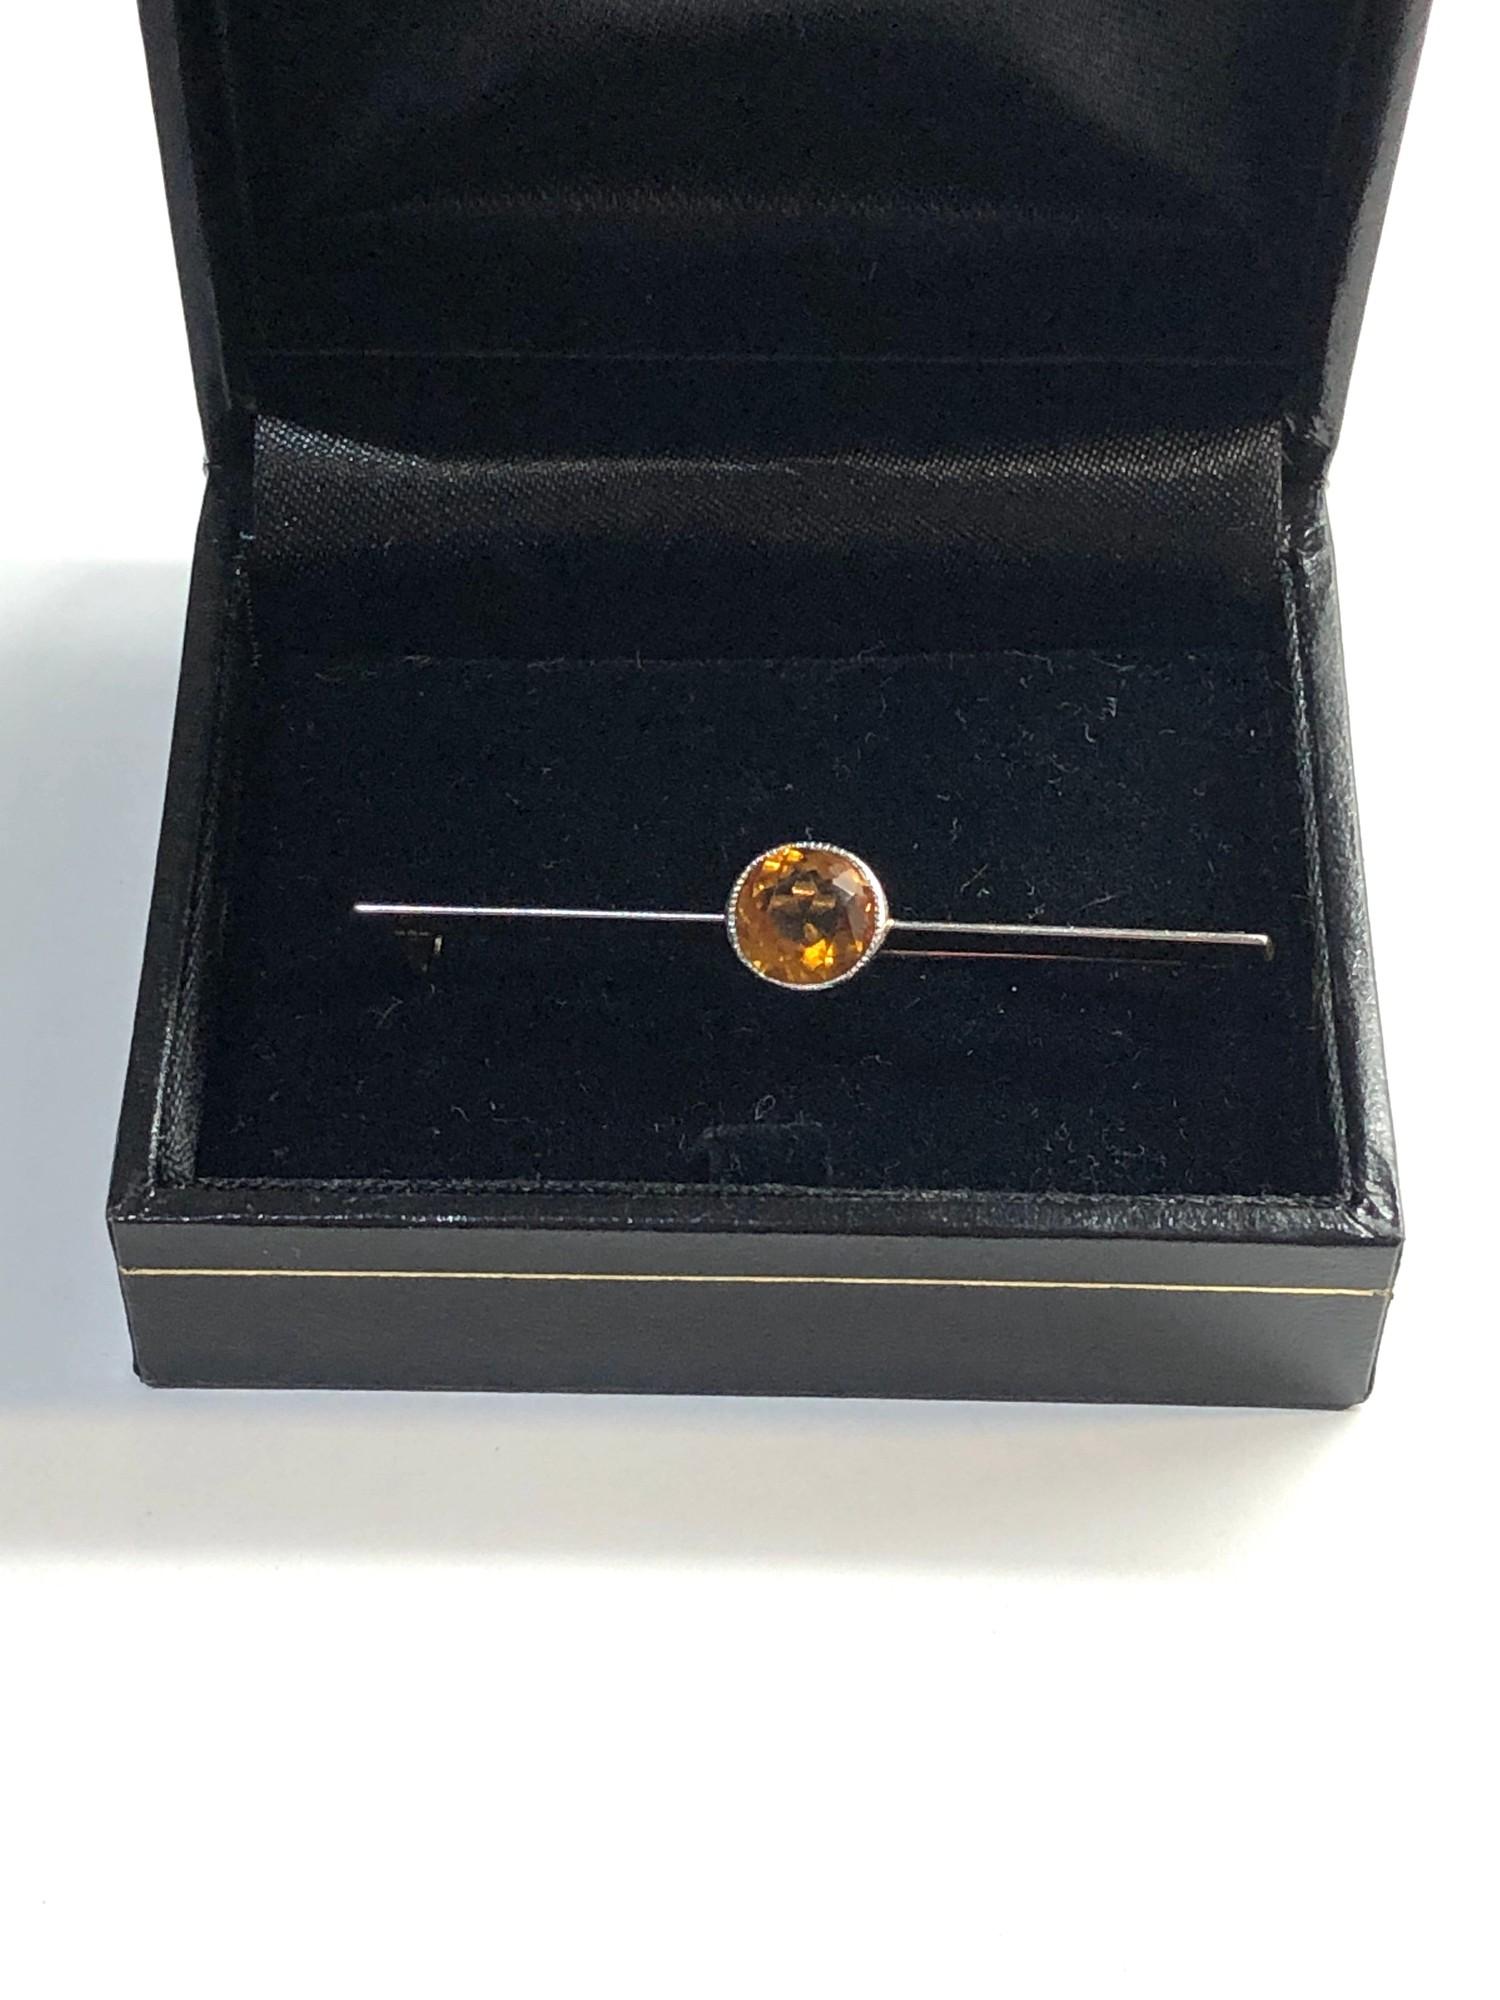 Antique high carat gold & citrine brooch measures approx49mm weight 4.3g - Image 5 of 5